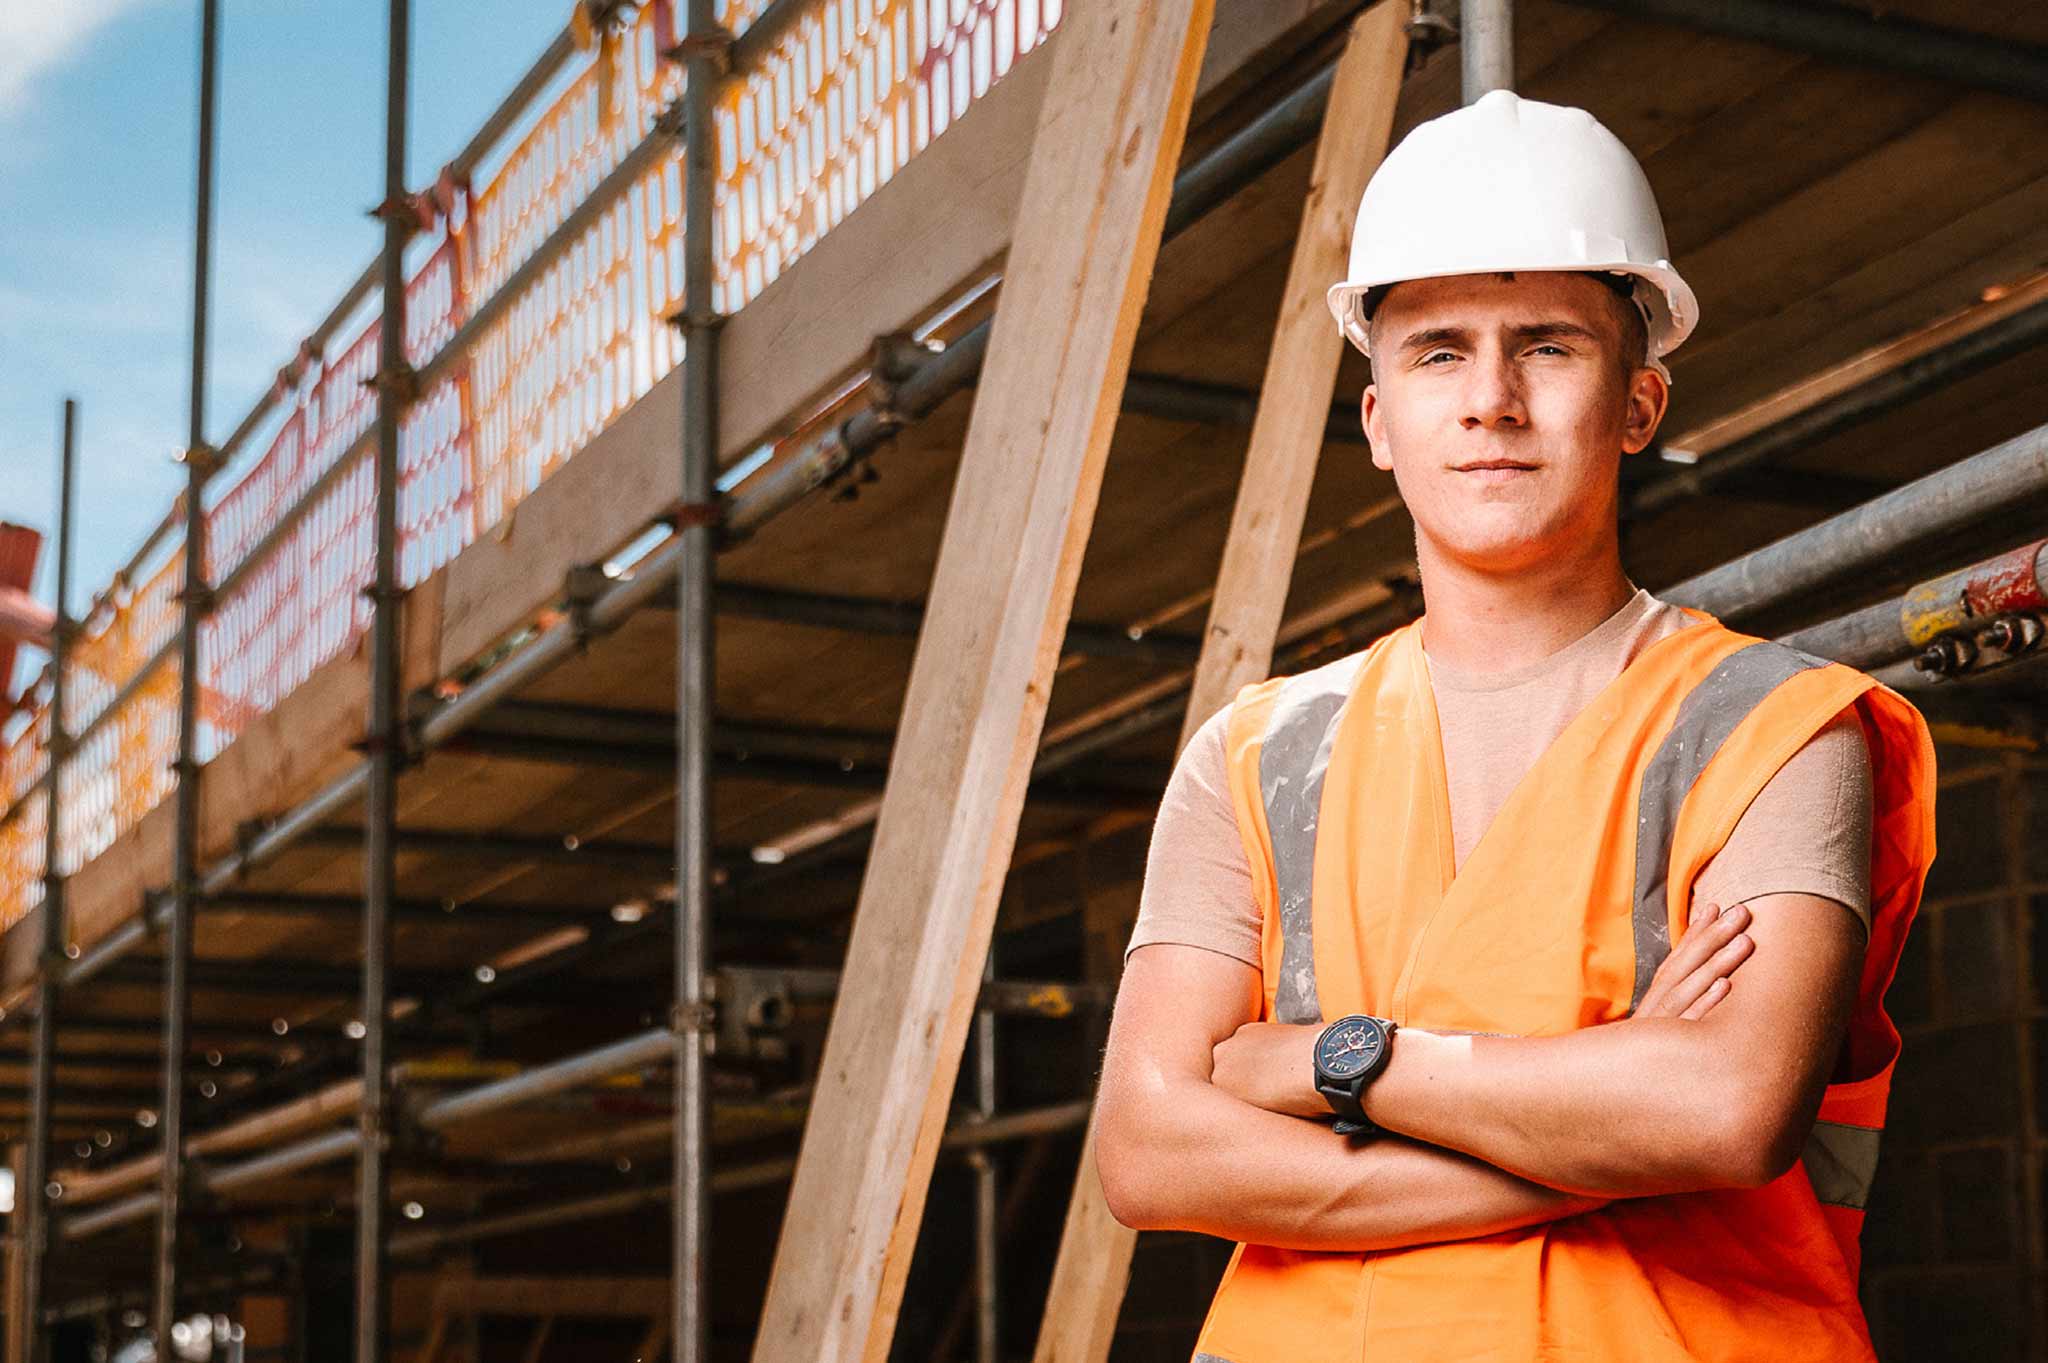 Wearing a hard hat and high visibility clothing, a student stands with folded arms against a backdrop of construction work behind.